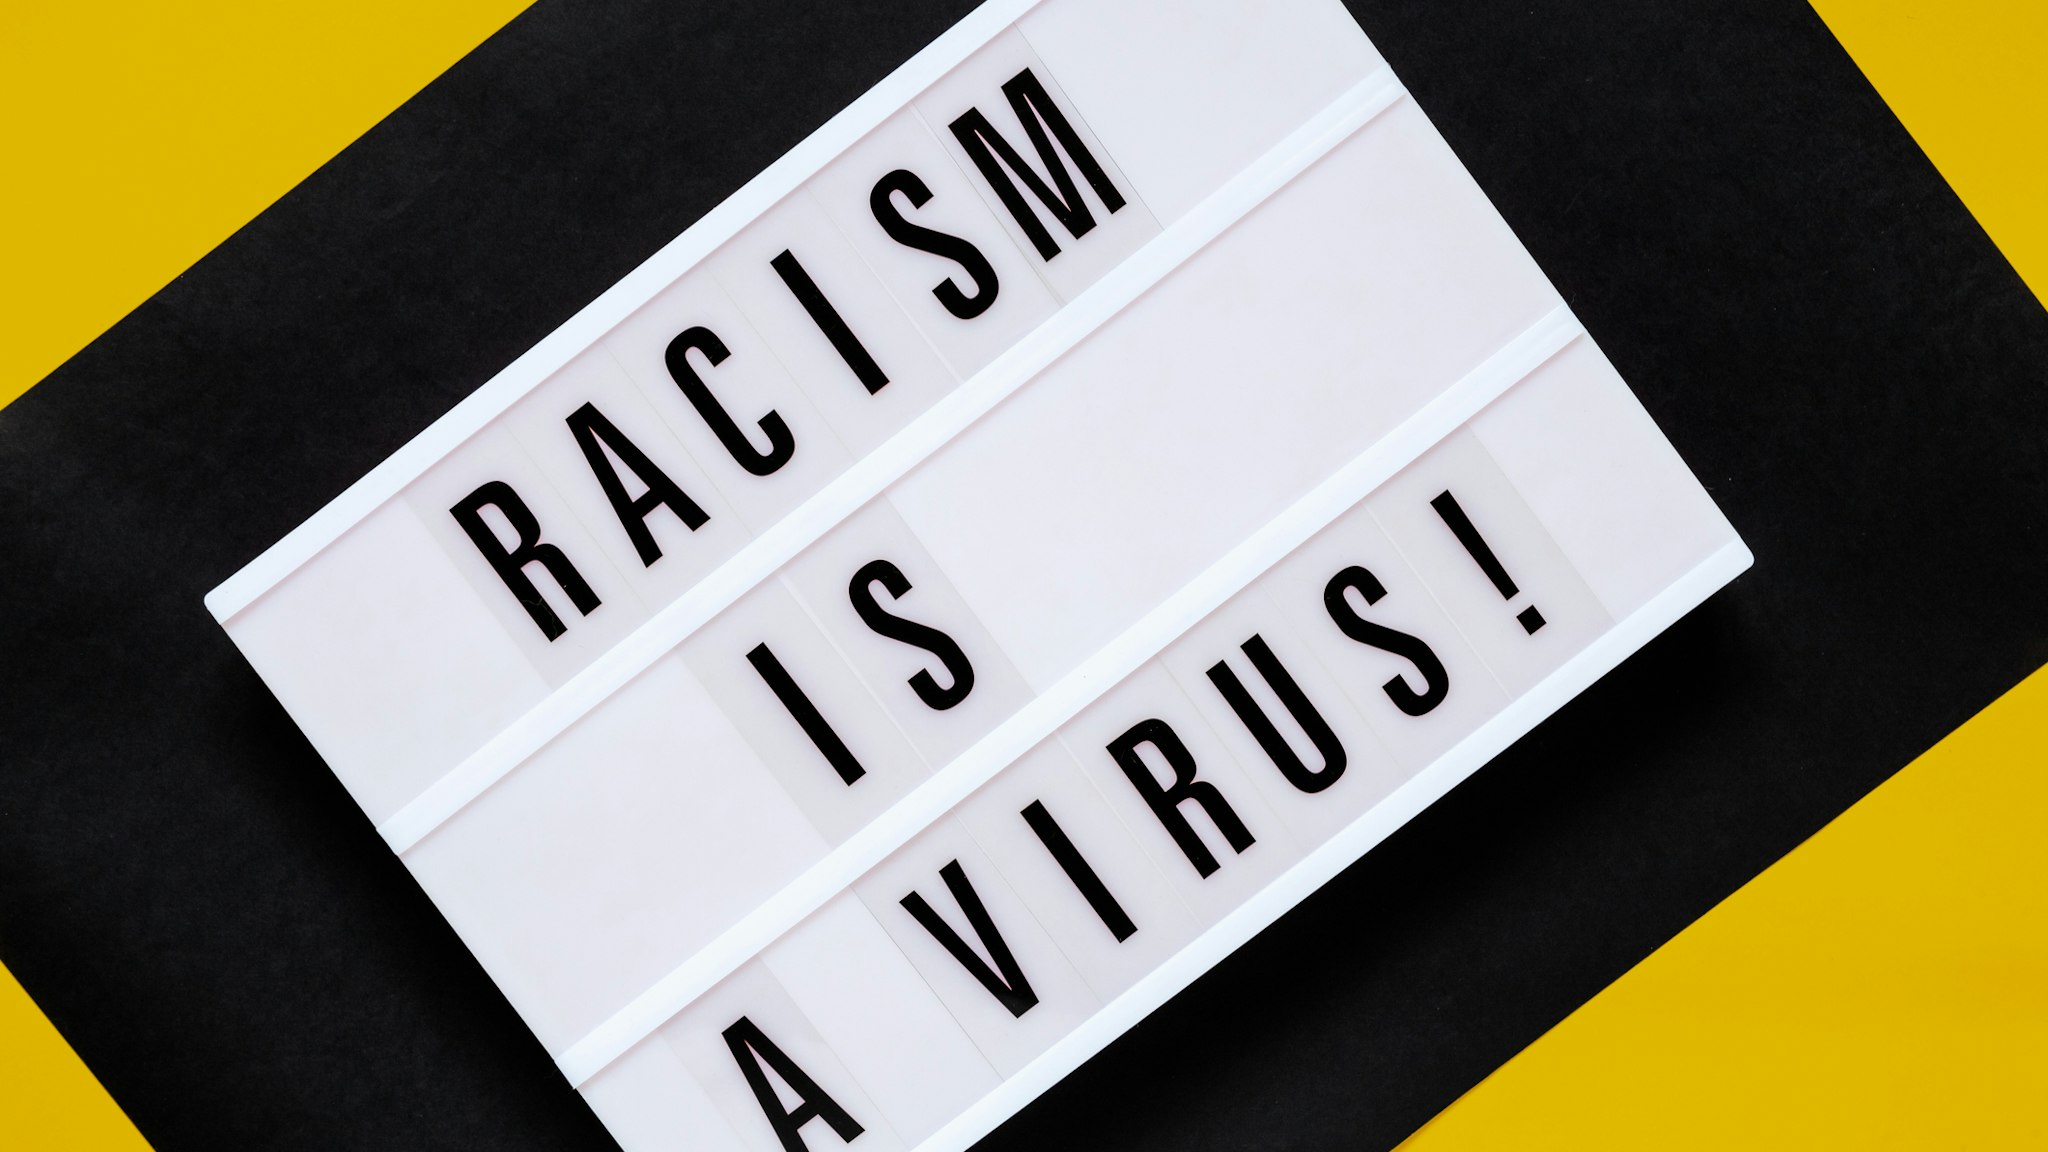 Racism is a Virus - conceptual text on light board on yellow ang black background - stock photo